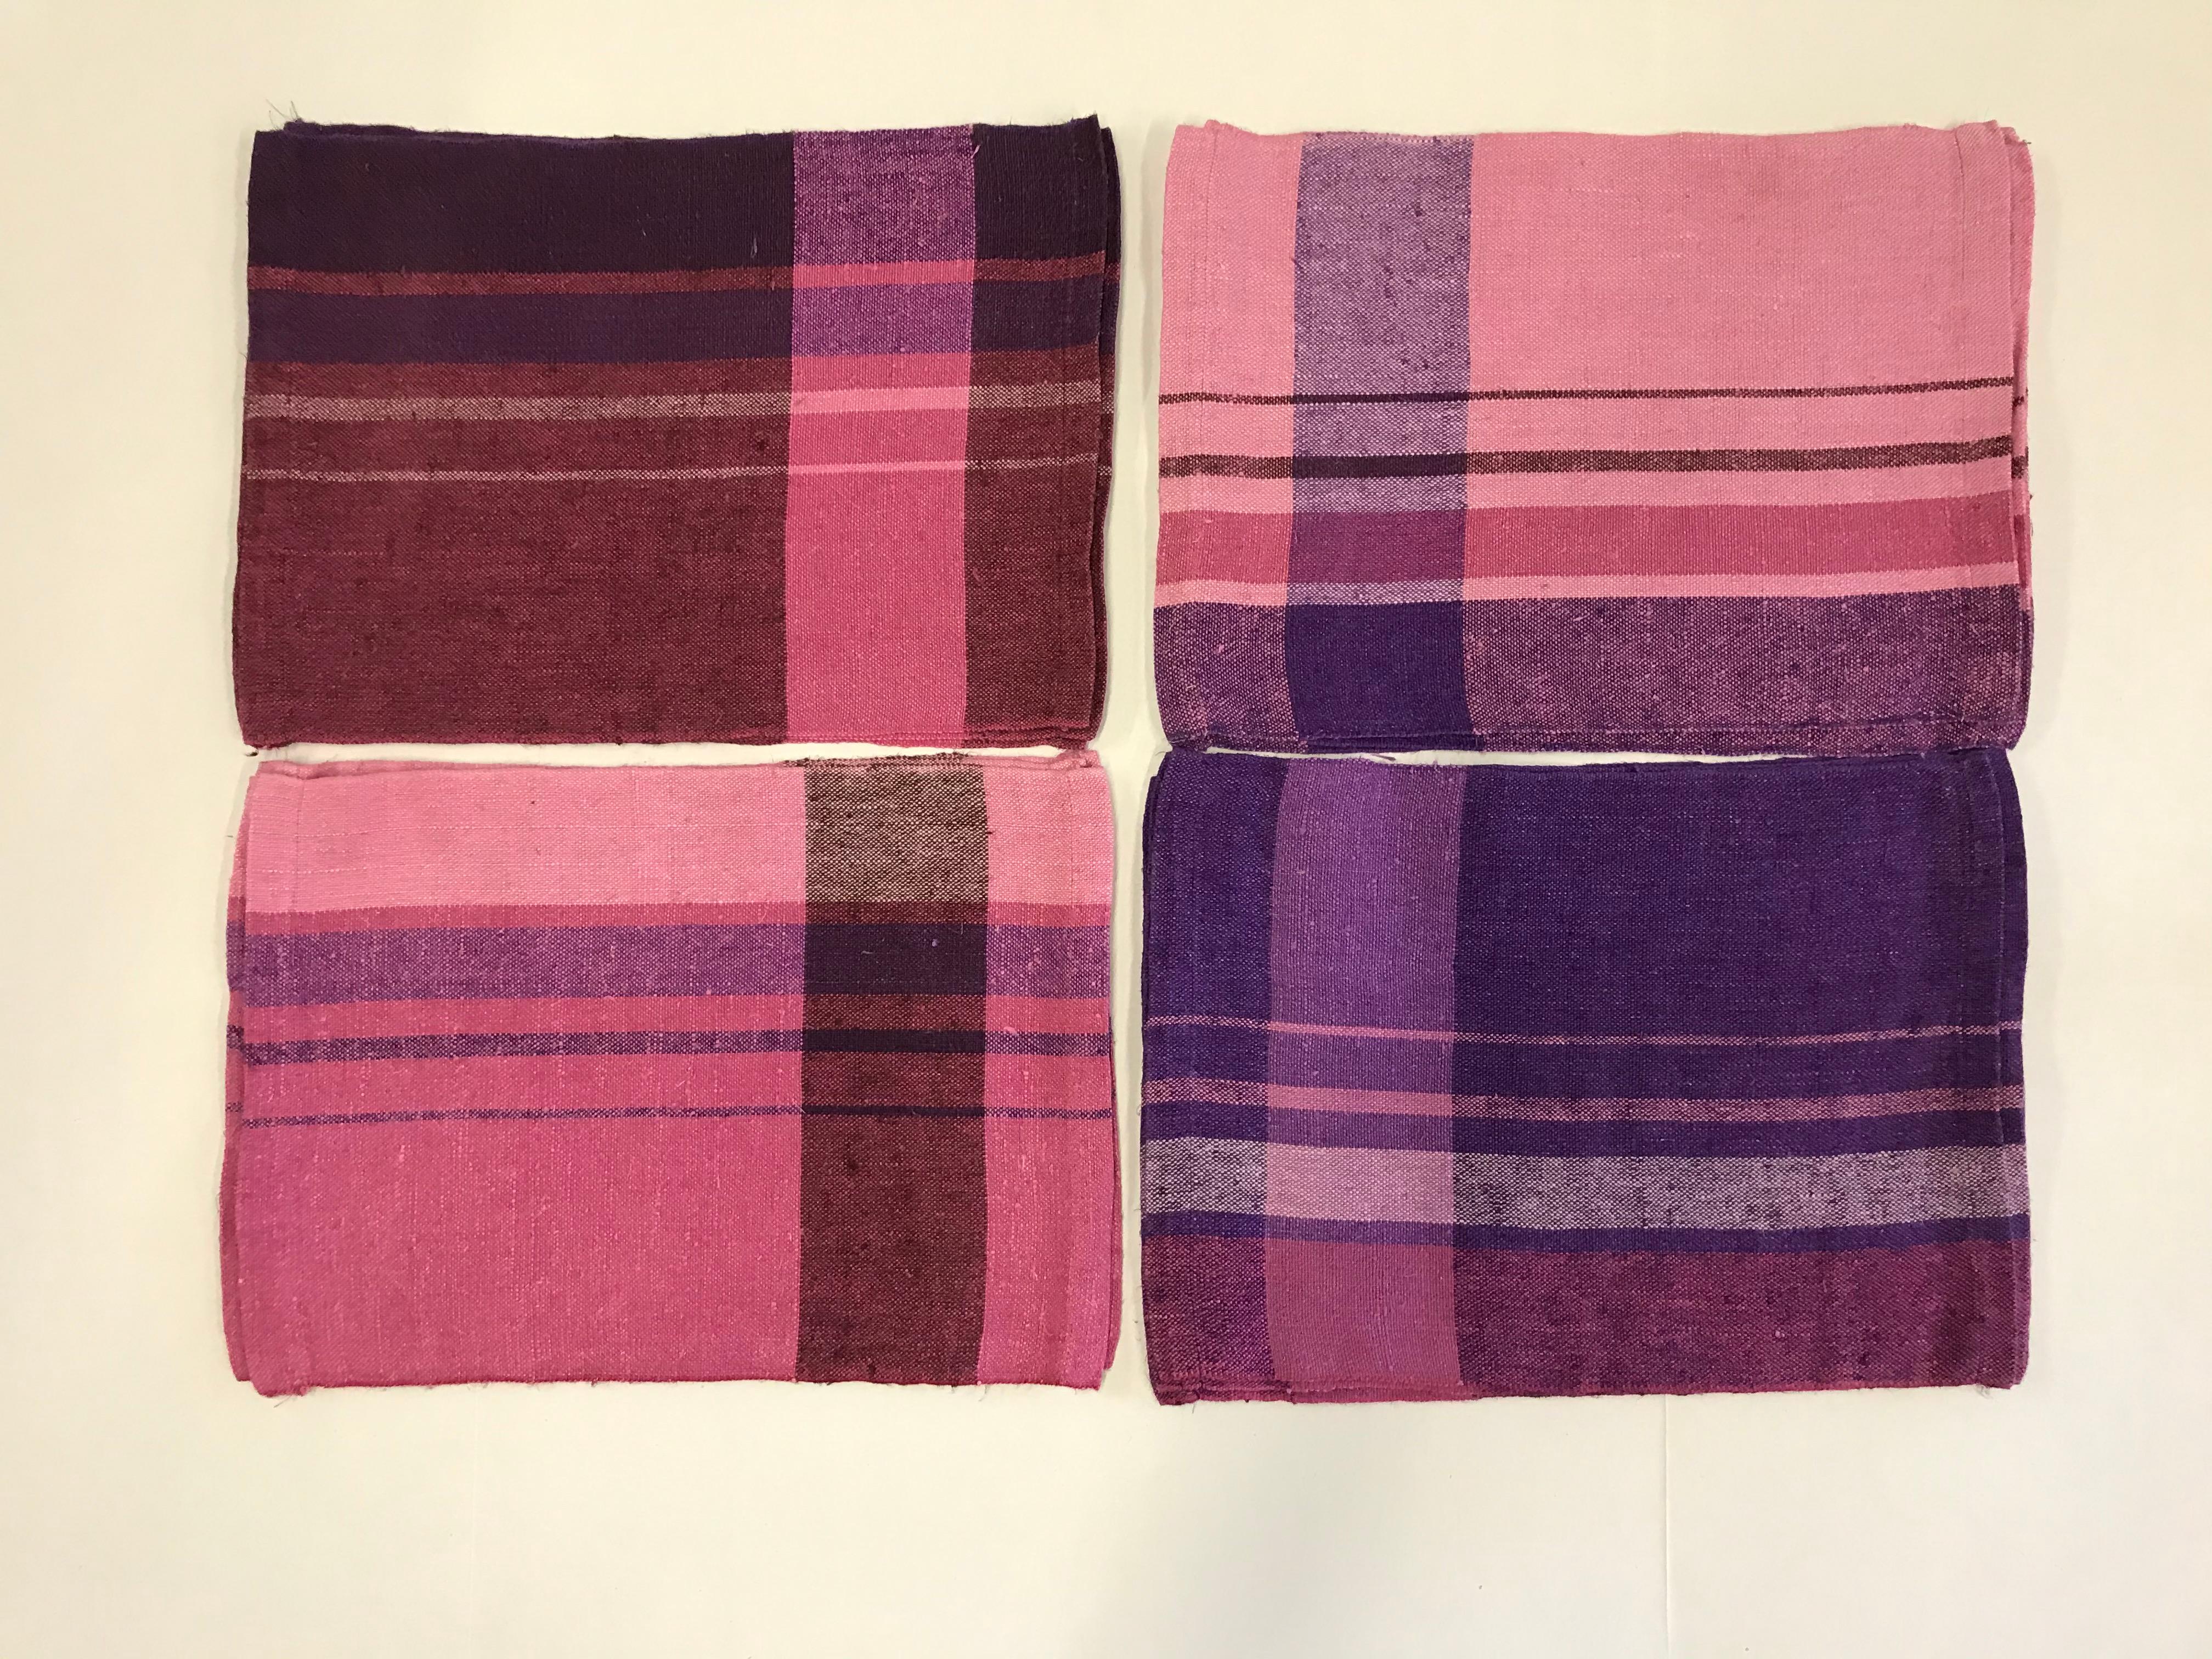 Here, 12 woven linen place mats made in Finland. Four of each color combinations. Chromatics was designed by Gerald Gullota in 1970. It was a line of dinnerware, flatware and accessories for the European company Block China and dinnerware. These